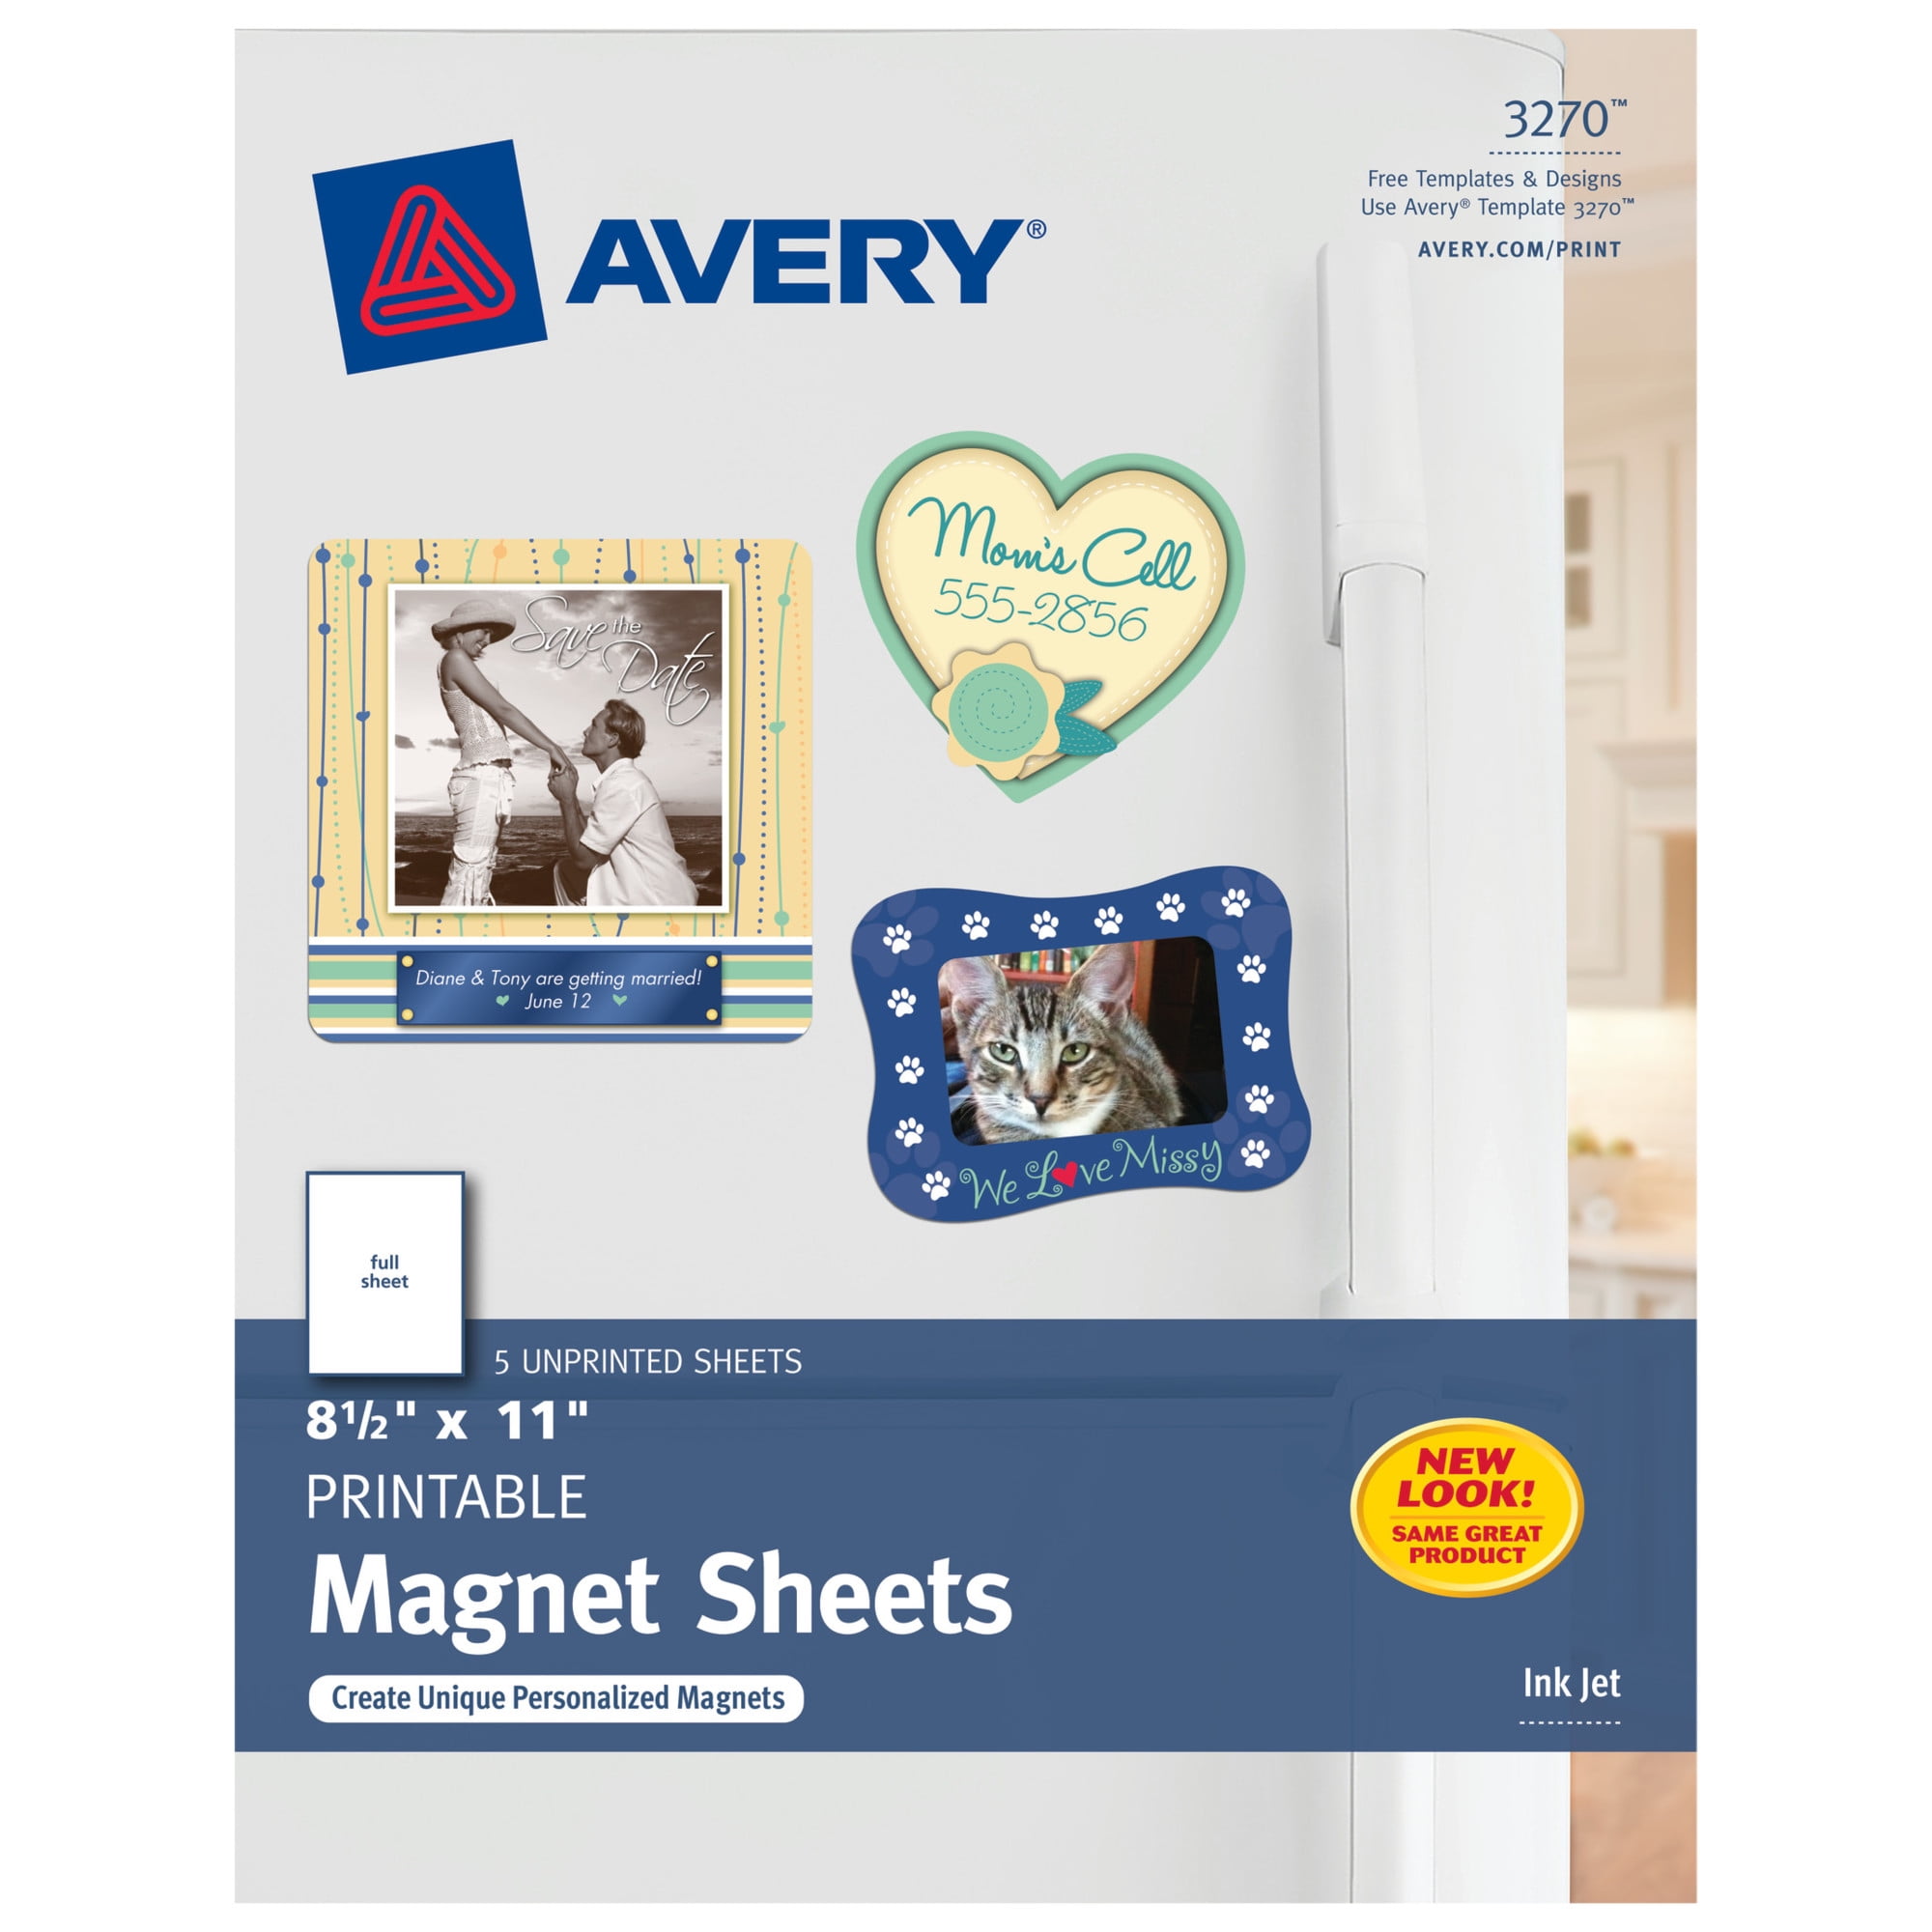 Mr. Pen- Adhesive Magnetic Sheets, 8 x 10, 4 Pack, Magnetic Sheet,  Magnetic Paper, Magnet Paper Sheets